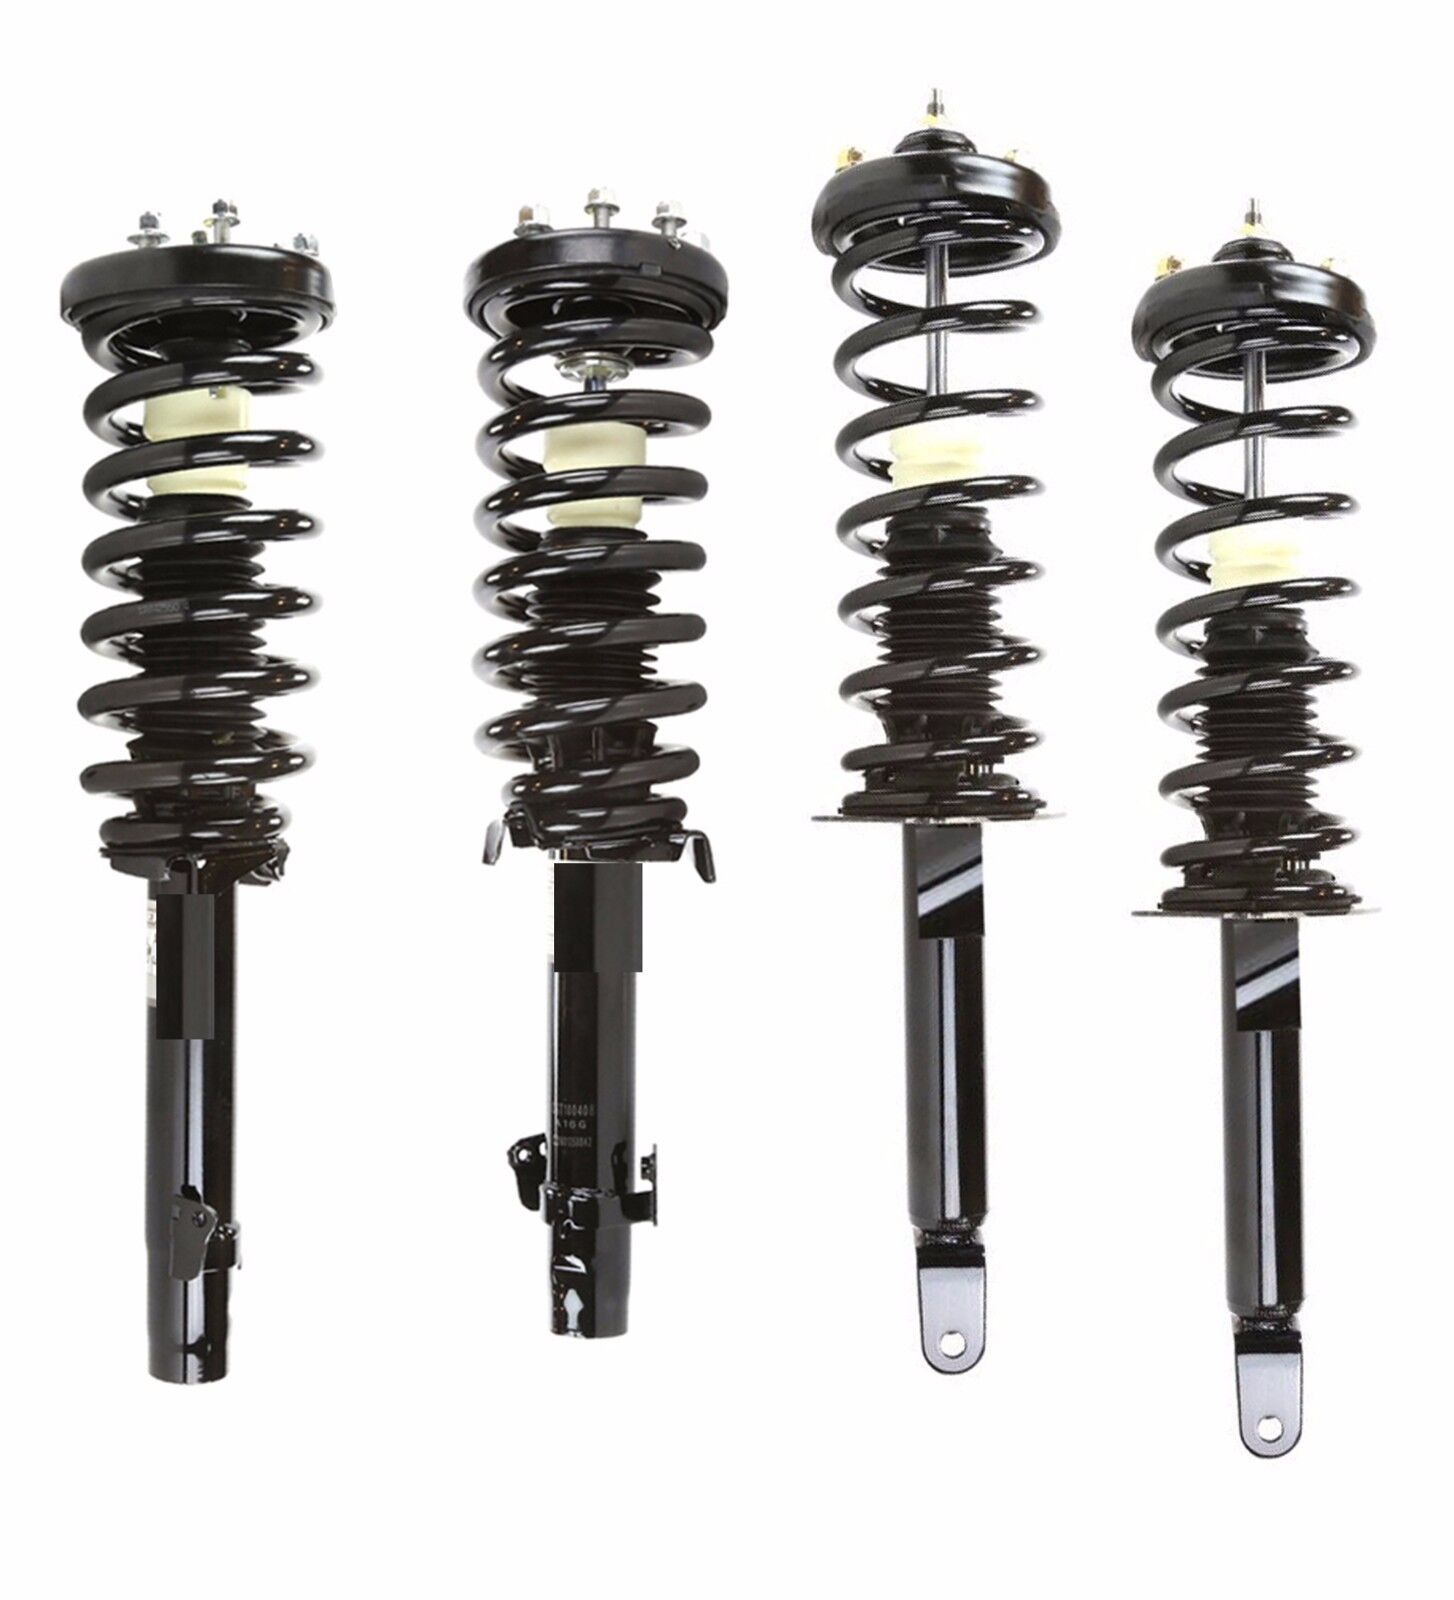 Full Set - 4 Complete Struts With Springs Mounts Fit 2008 - 2012 Honda Accord 